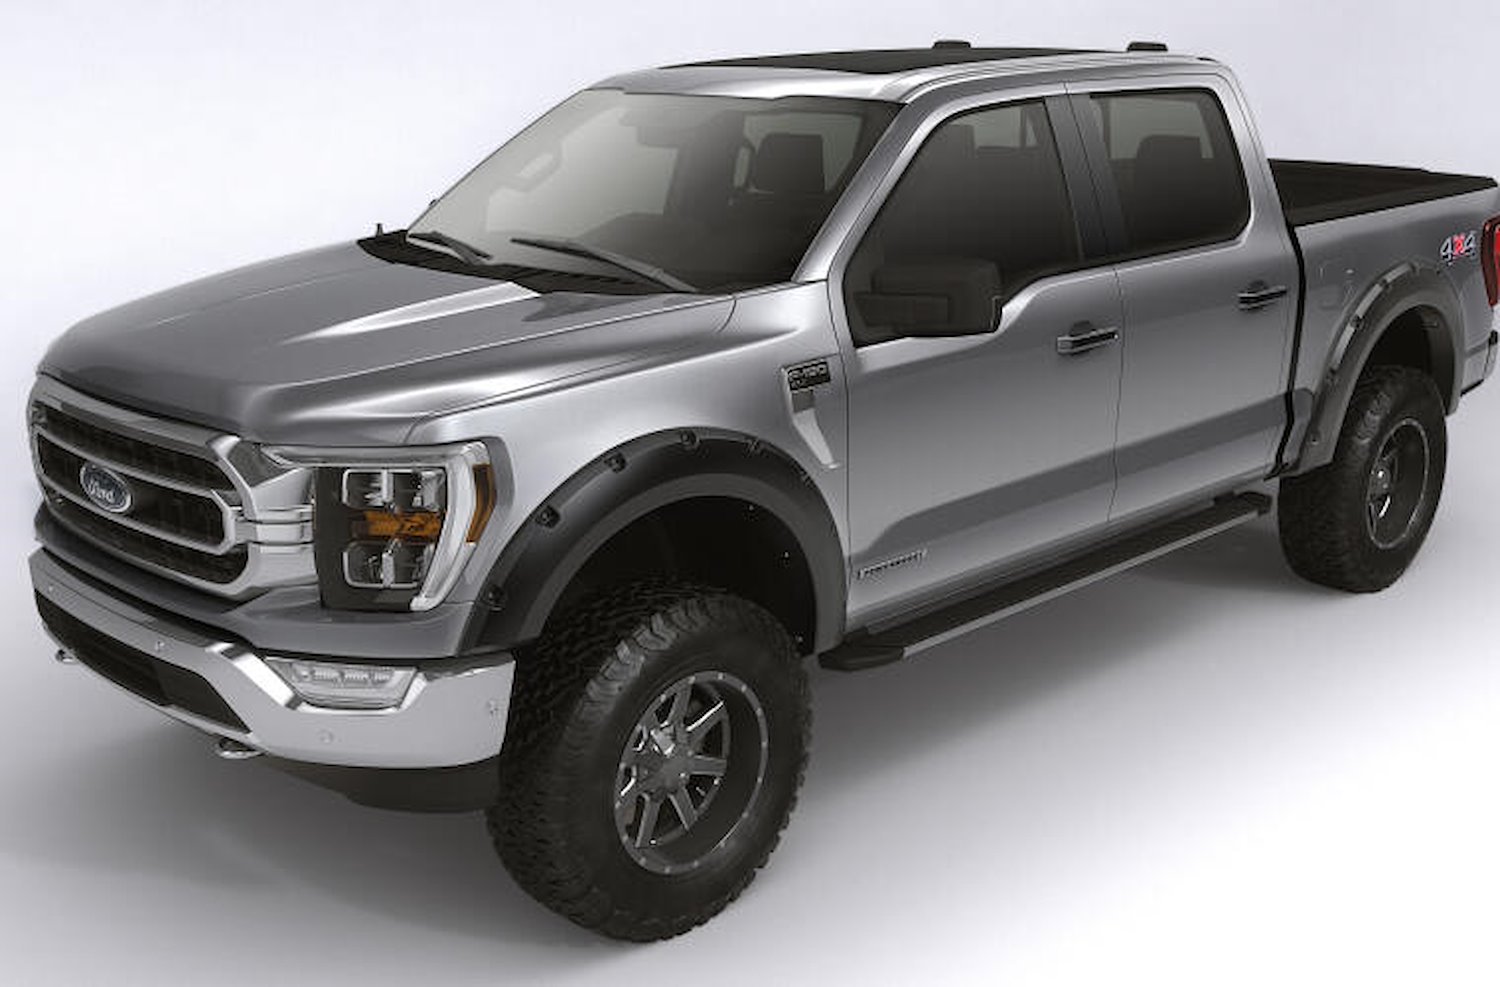 Forge Front/Rear Fender Flares for Late-Model Ford F-250, F-350, F-450 Super-Duty